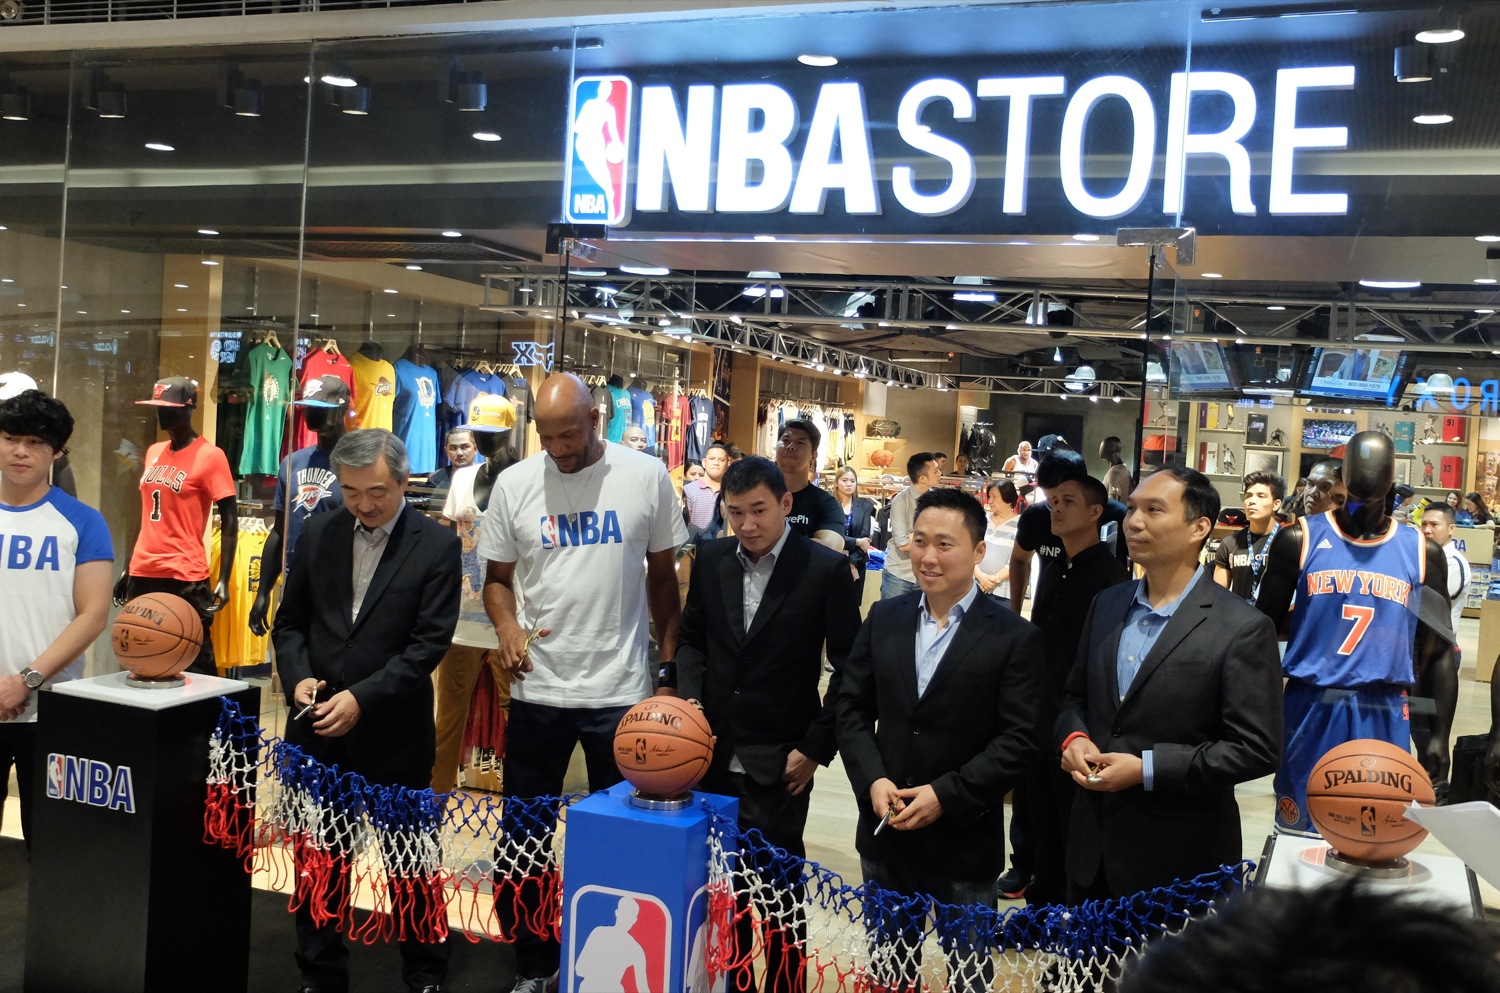 2nd NBA store in the Philippines offers interactive fan spaces